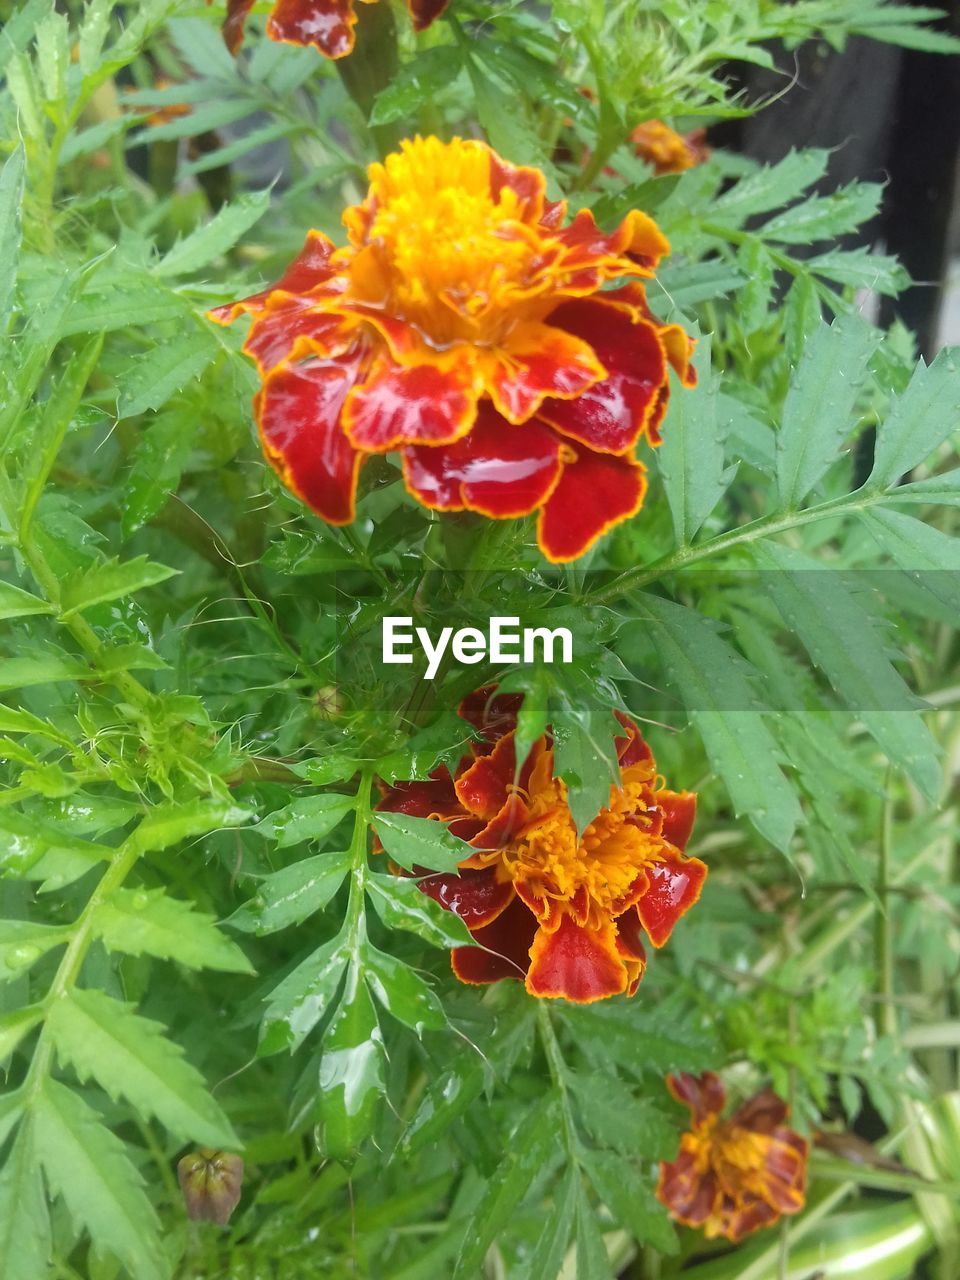 plant, flowering plant, flower, beauty in nature, growth, freshness, green, fragility, plant part, nature, petal, leaf, close-up, flower head, inflorescence, day, no people, high angle view, outdoors, botany, orange color, red